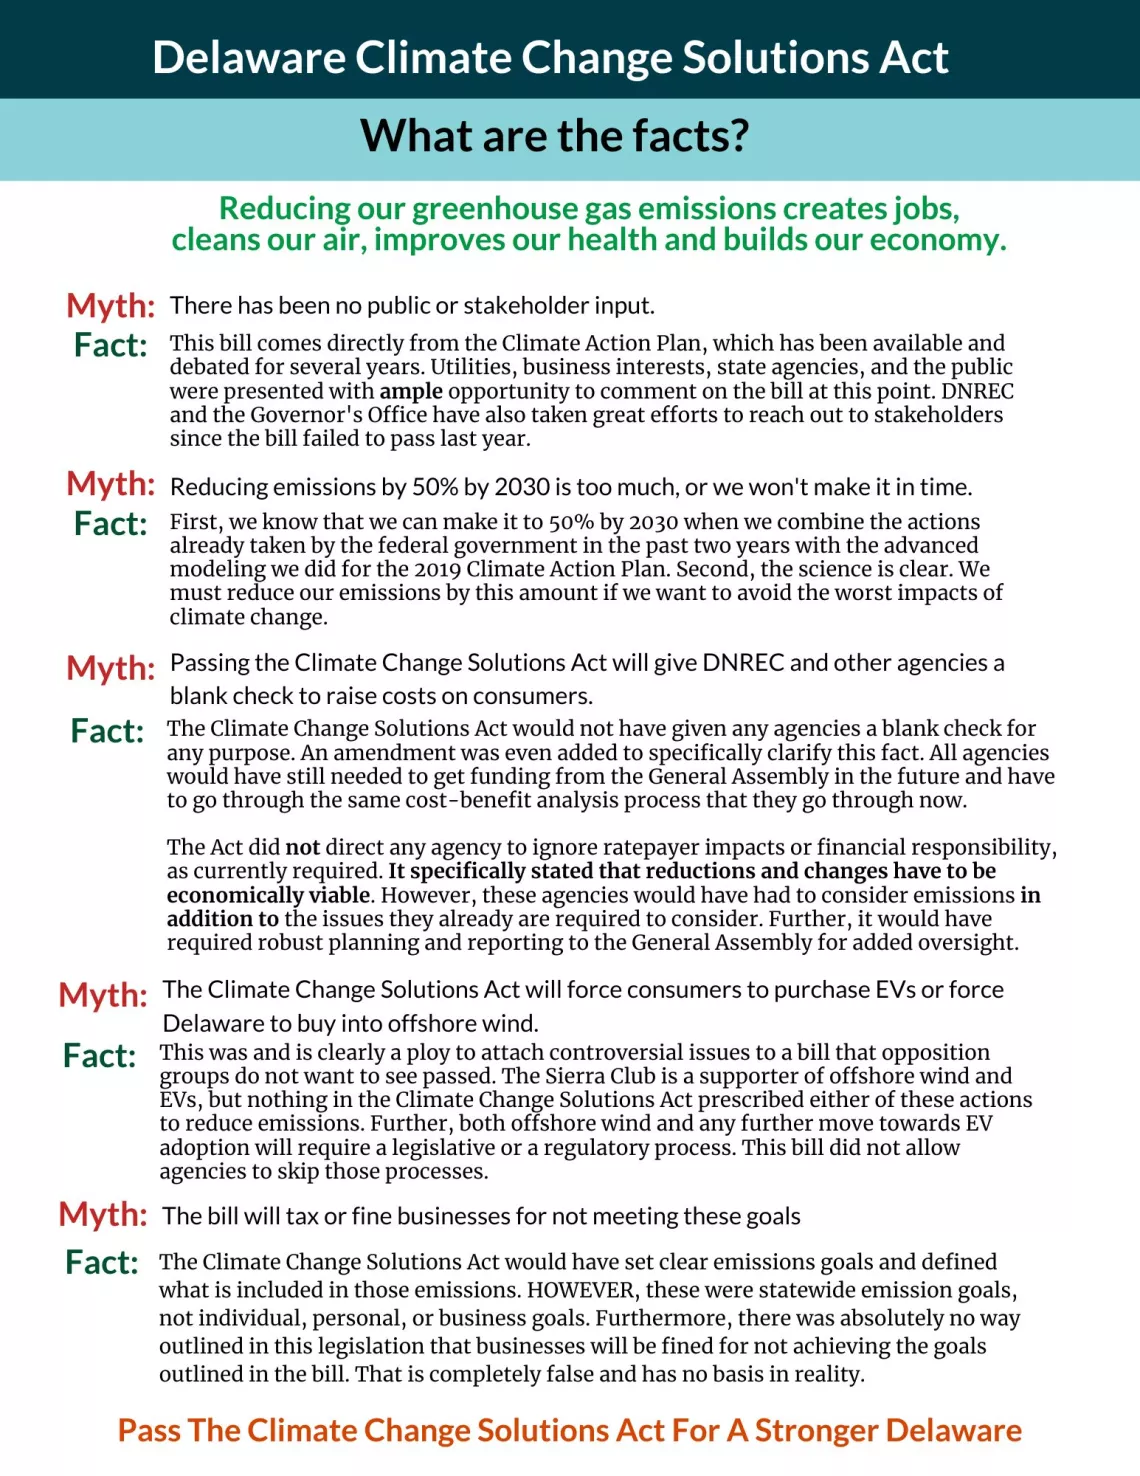 Fact sheet on climate solutions